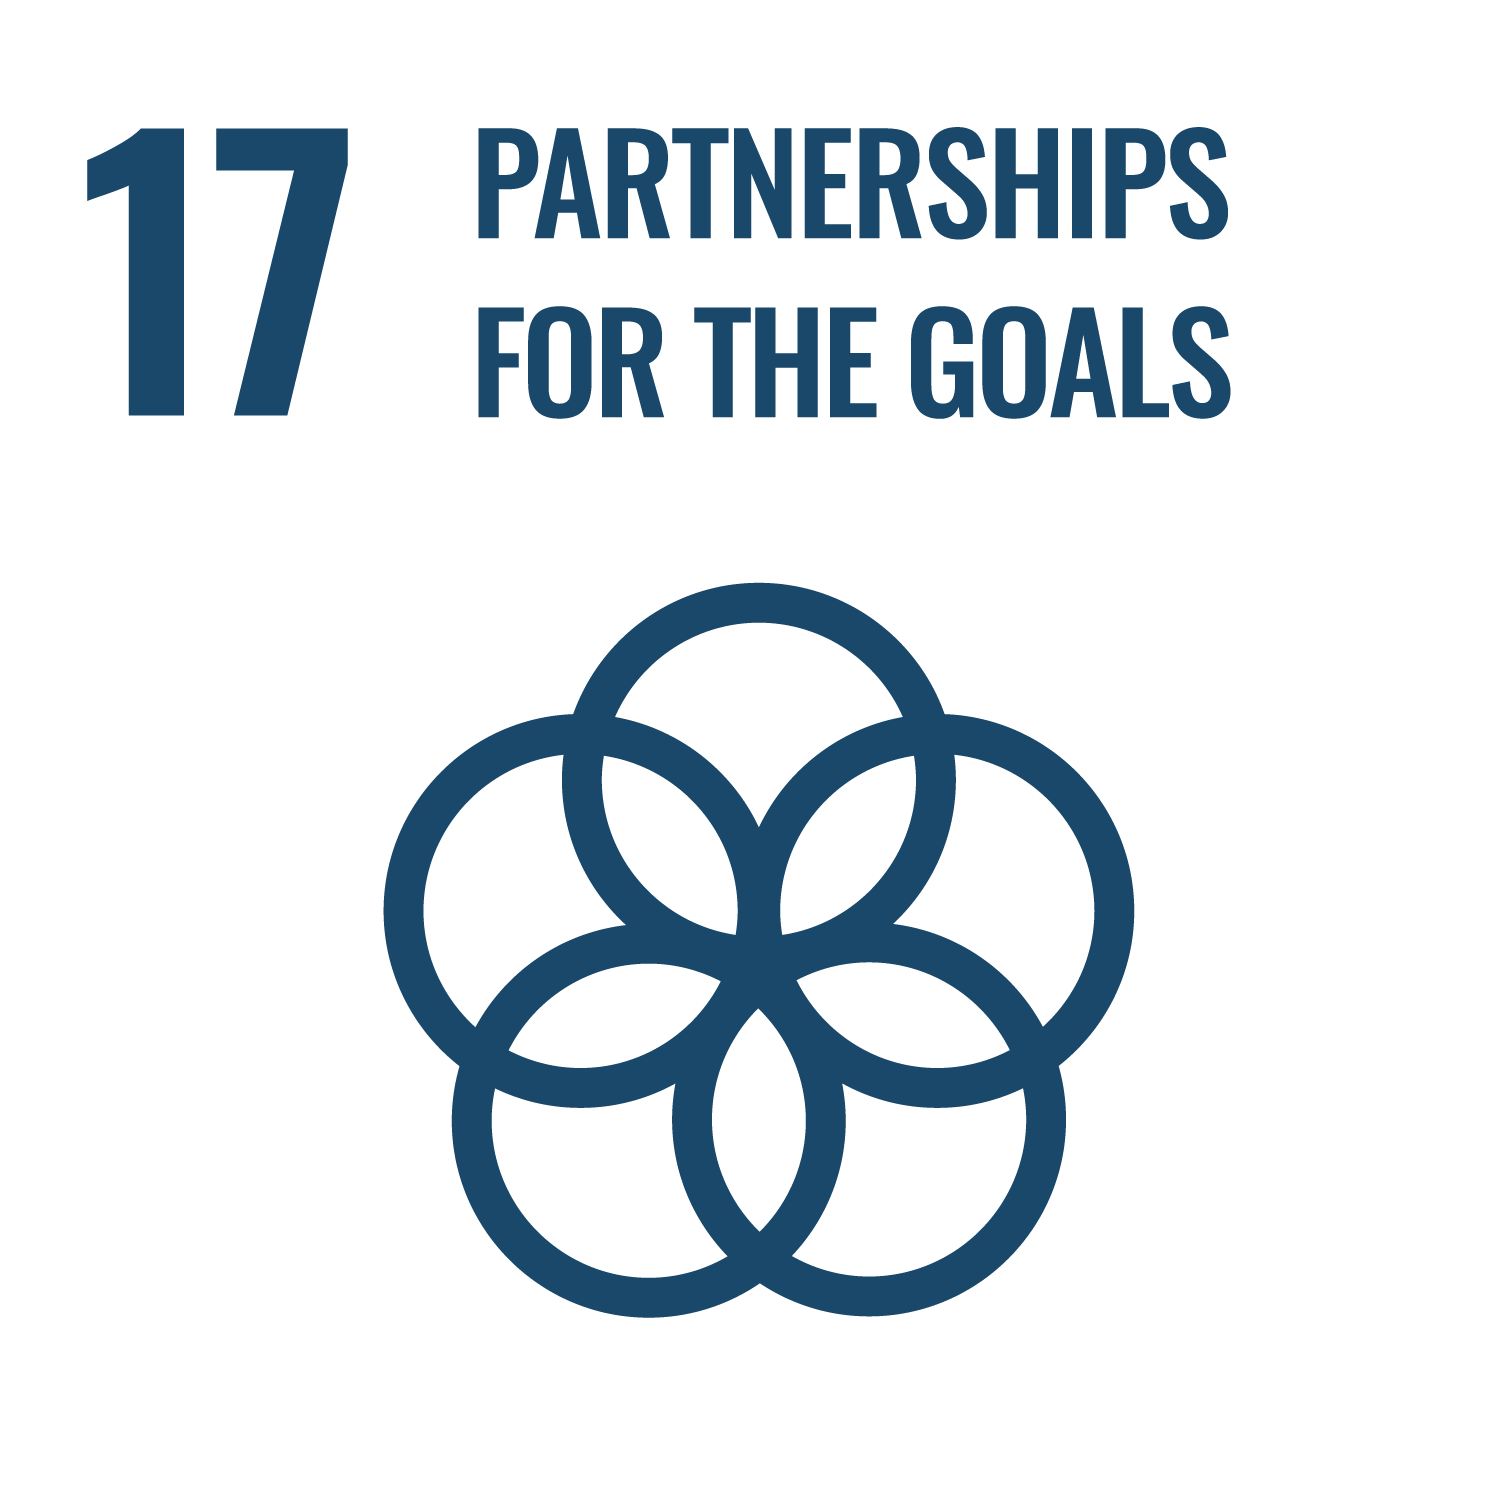 17. Partnerships for the Goals